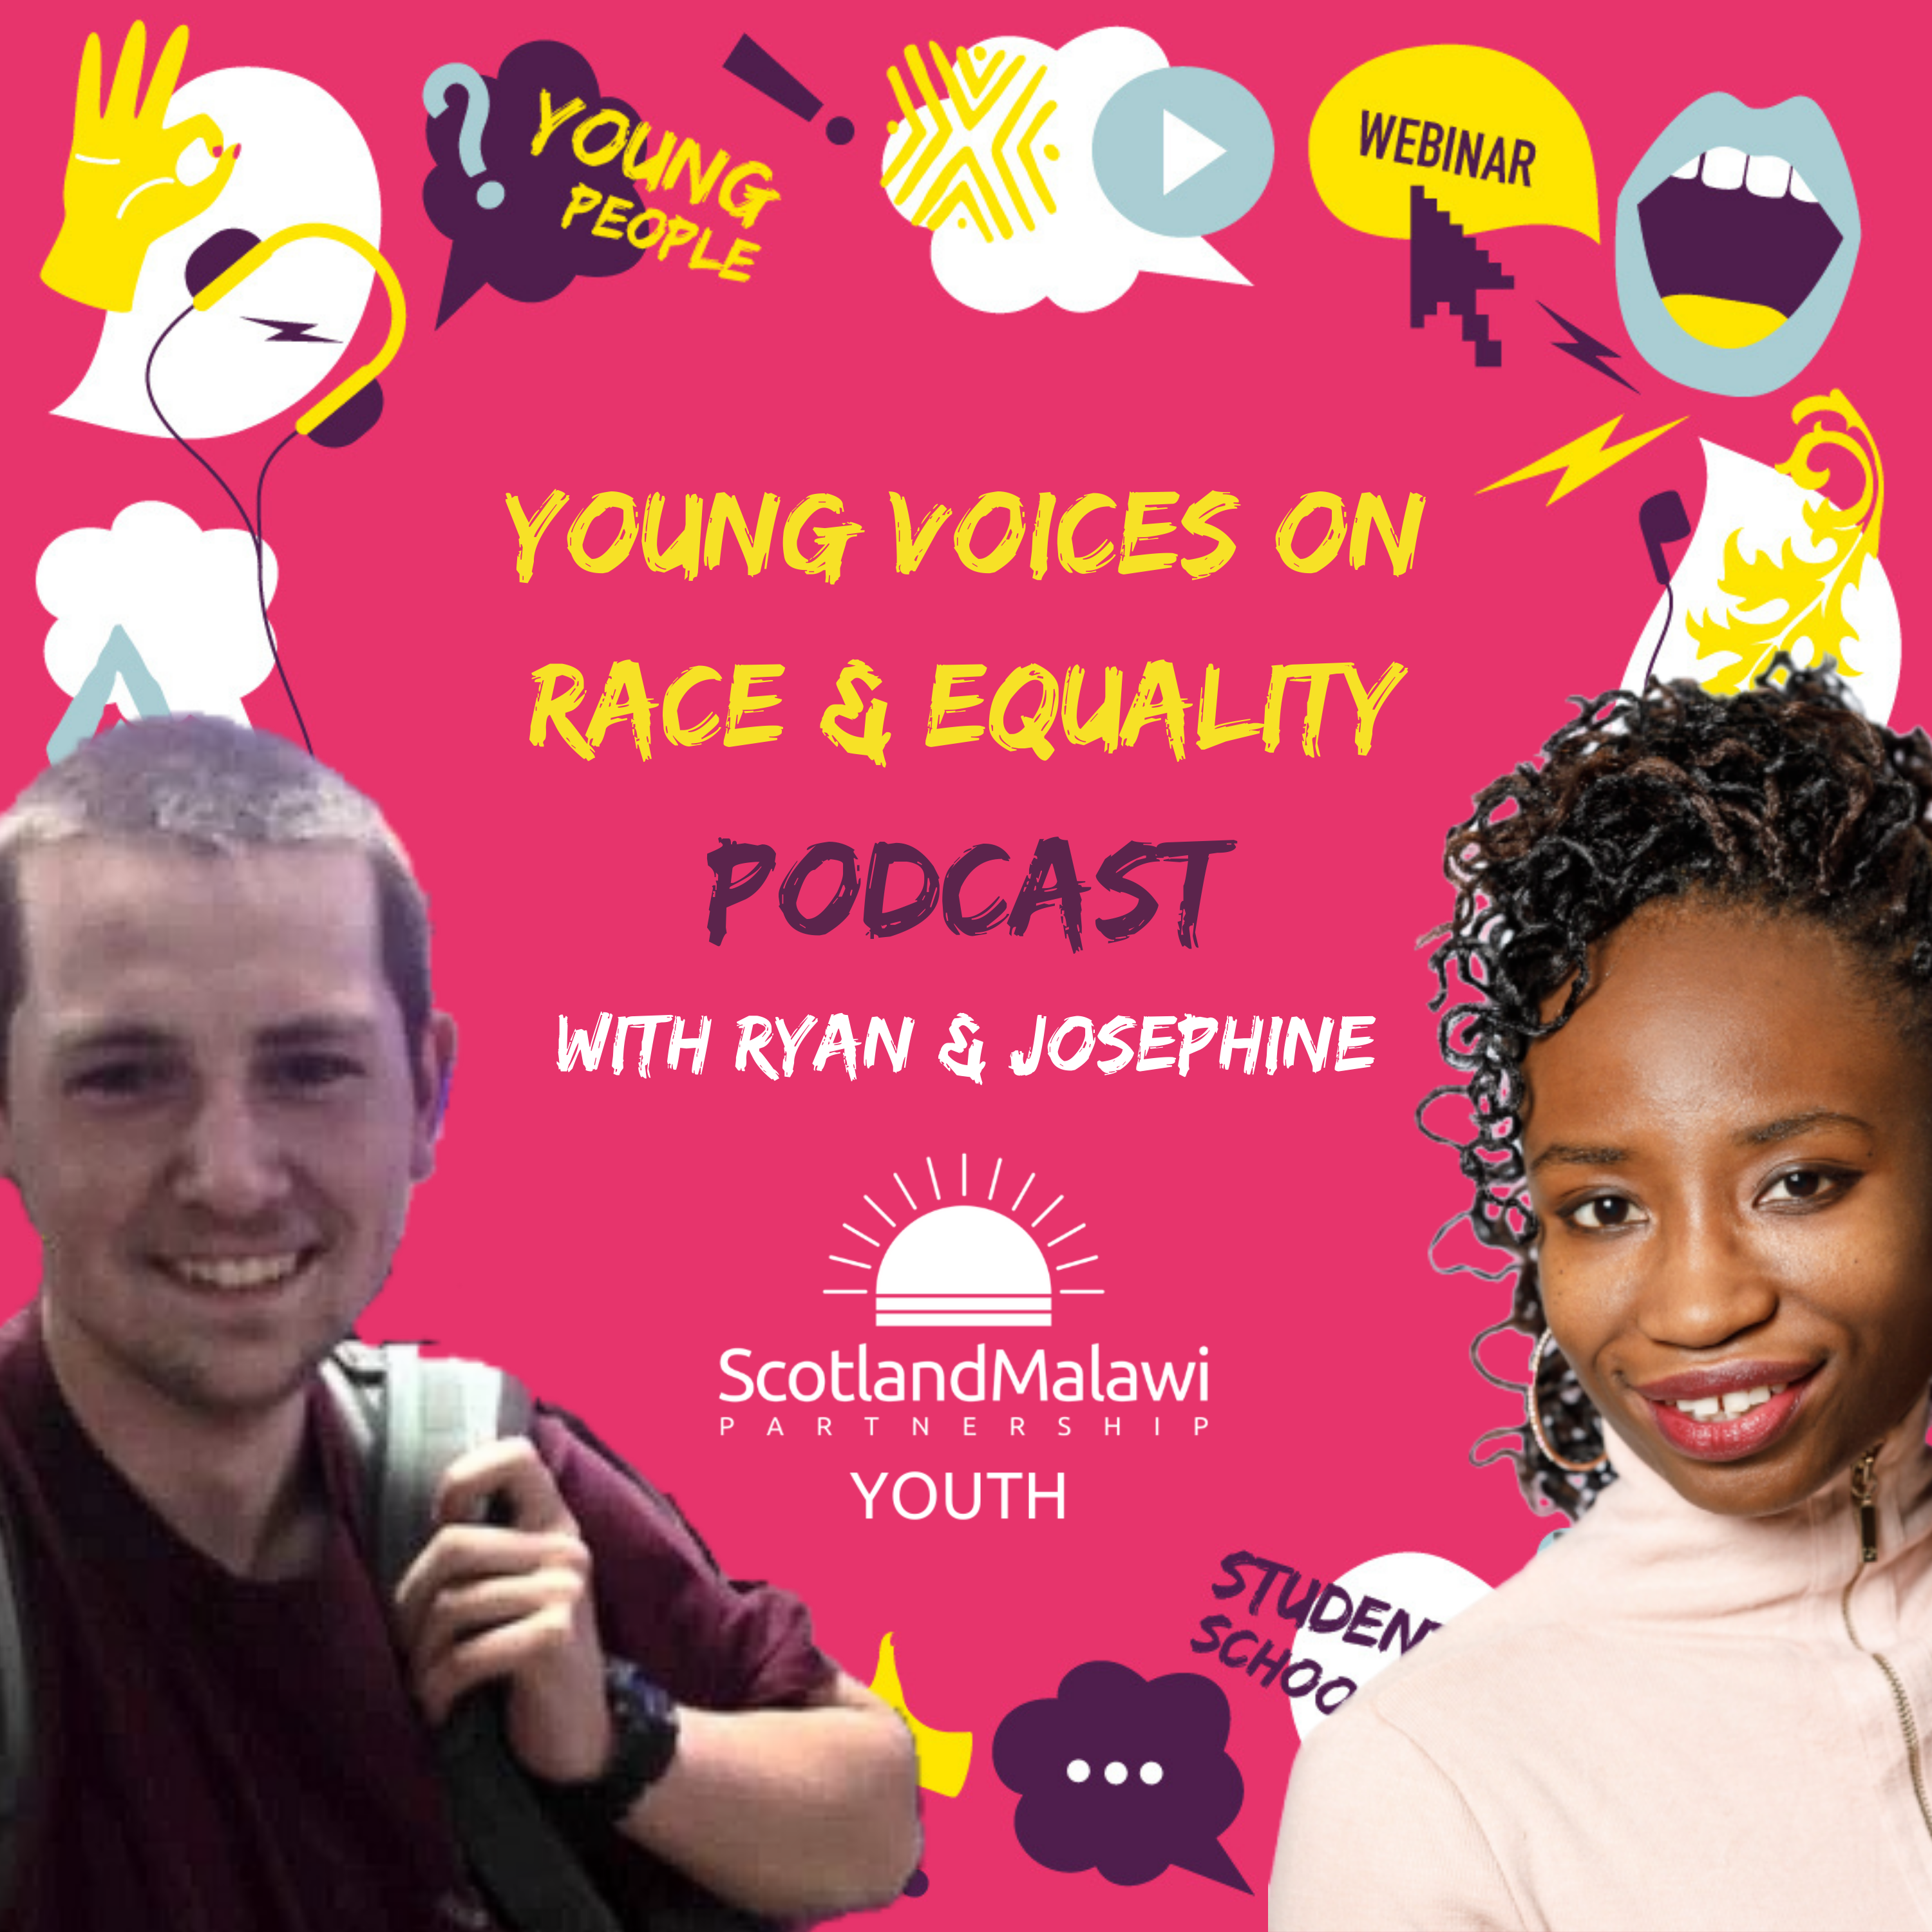 Race Equality Podcast Cover Art